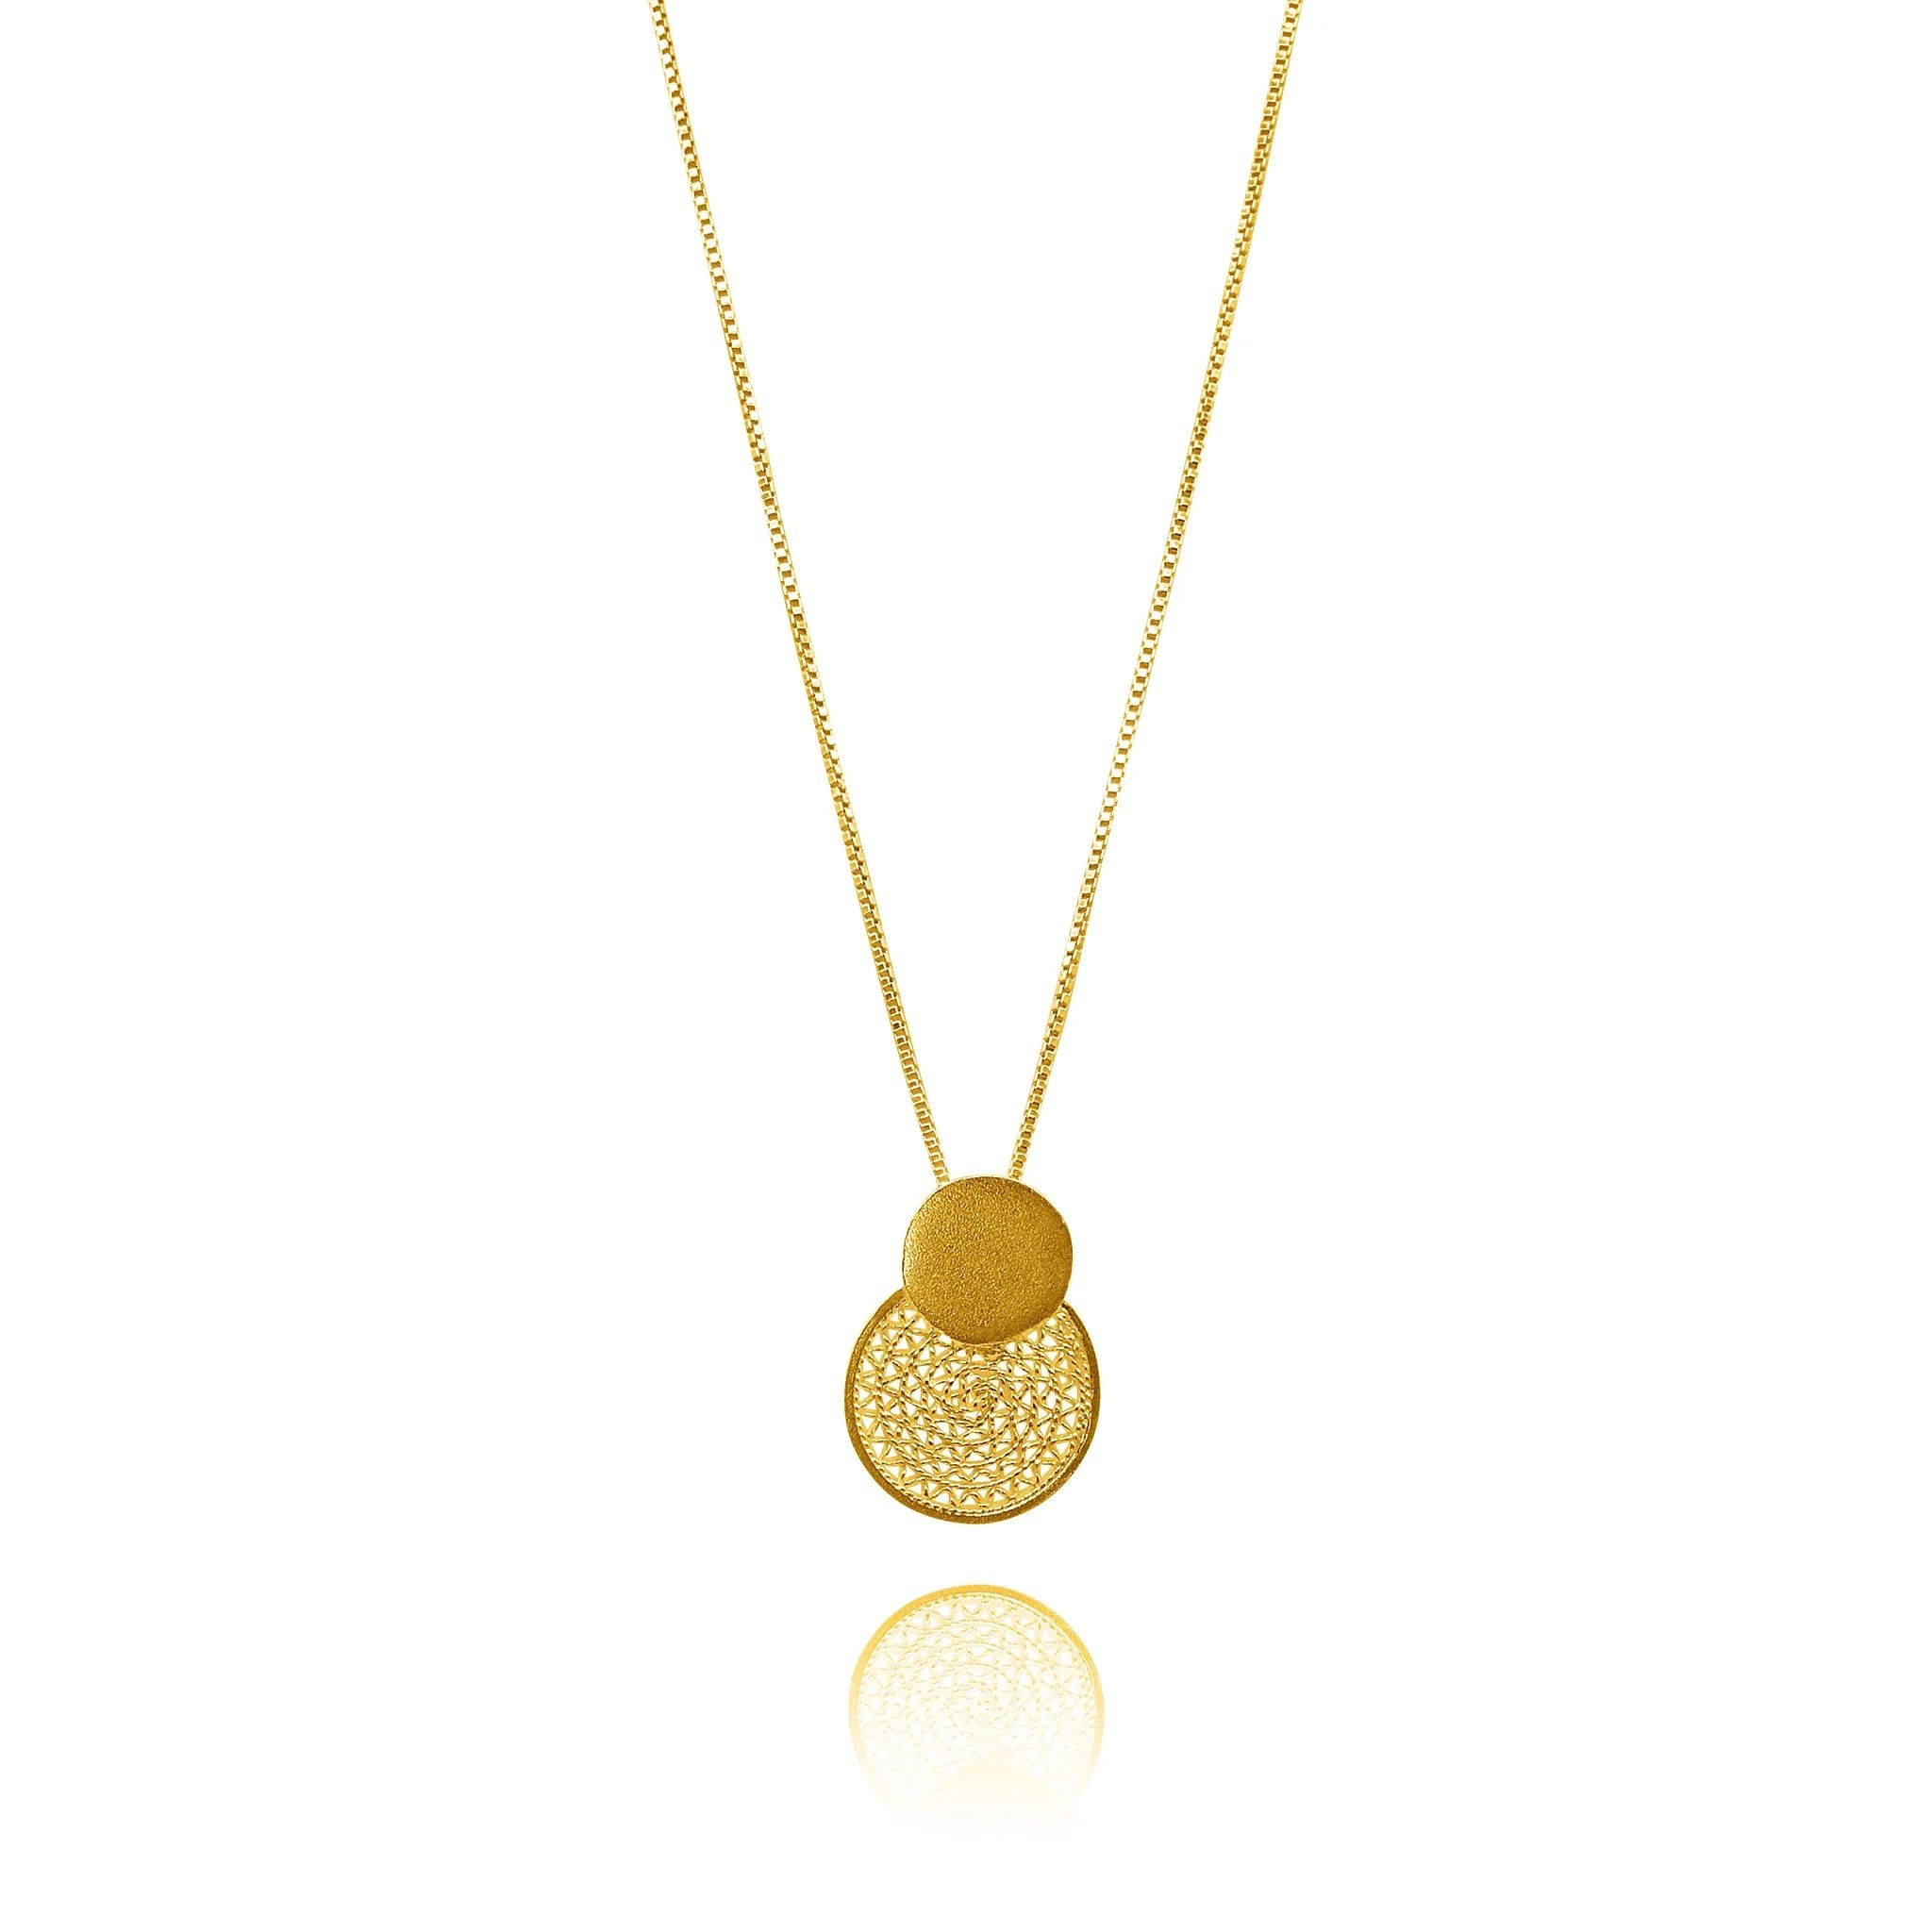 BLANCH GOLD PENDANT NECKLACE FILIGREE | Olmox Jewelry